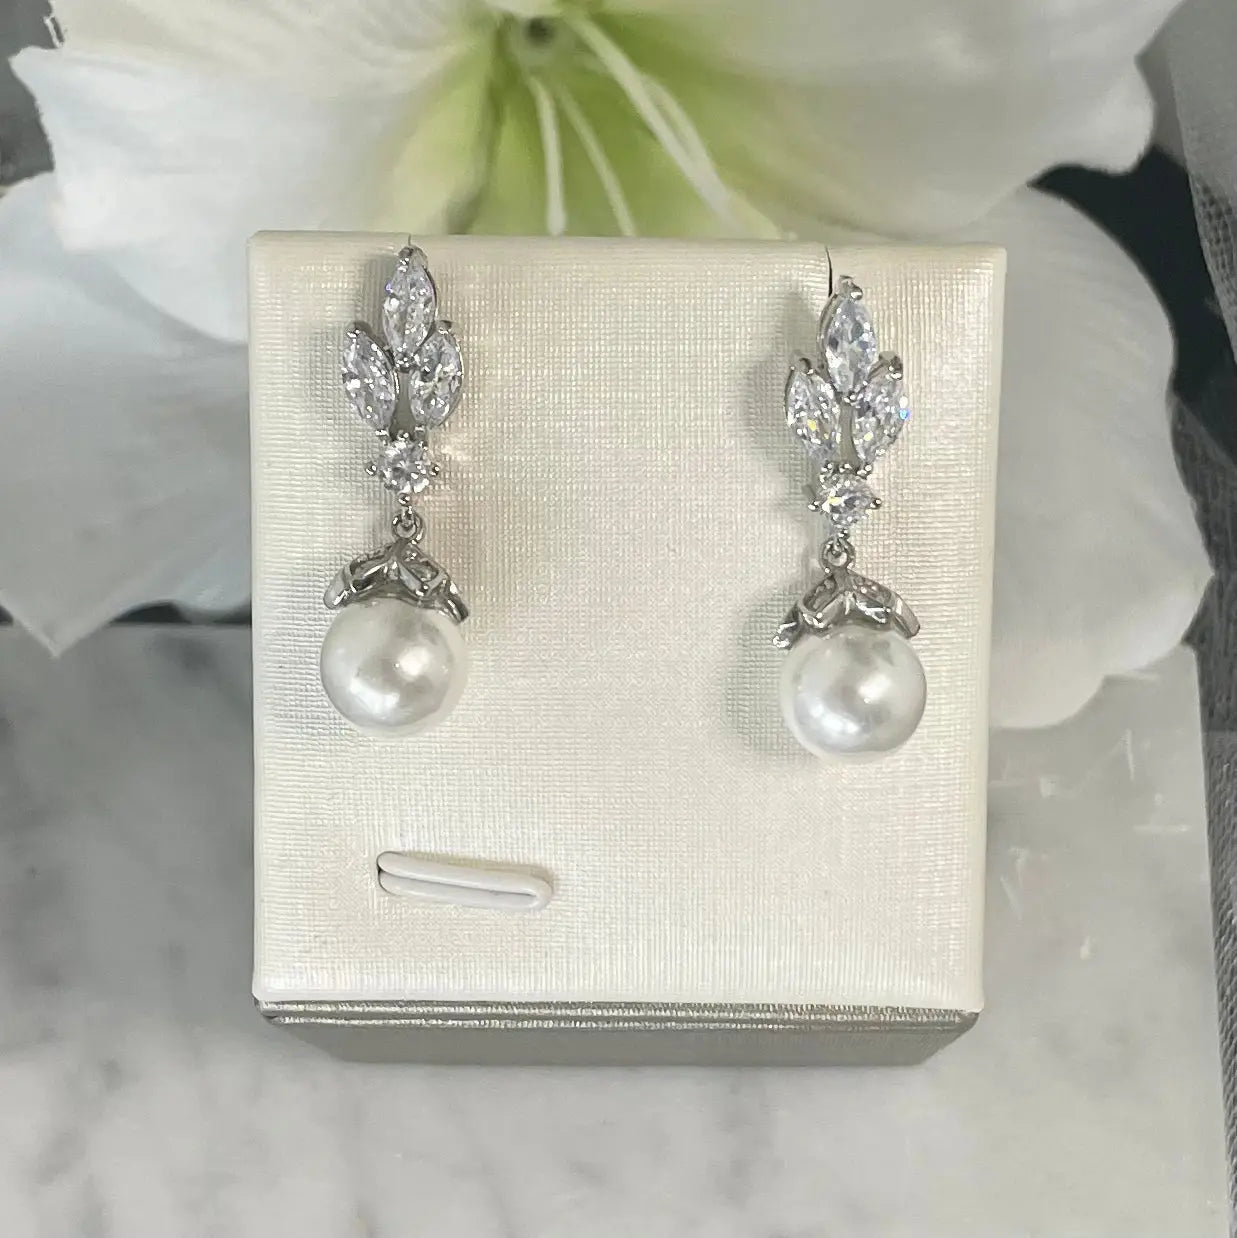 Levin crystal pearl earrings with a three-leaf design and central crystal, accented by a delicately held pearl, perfect for enhancing any bridal ensemble.